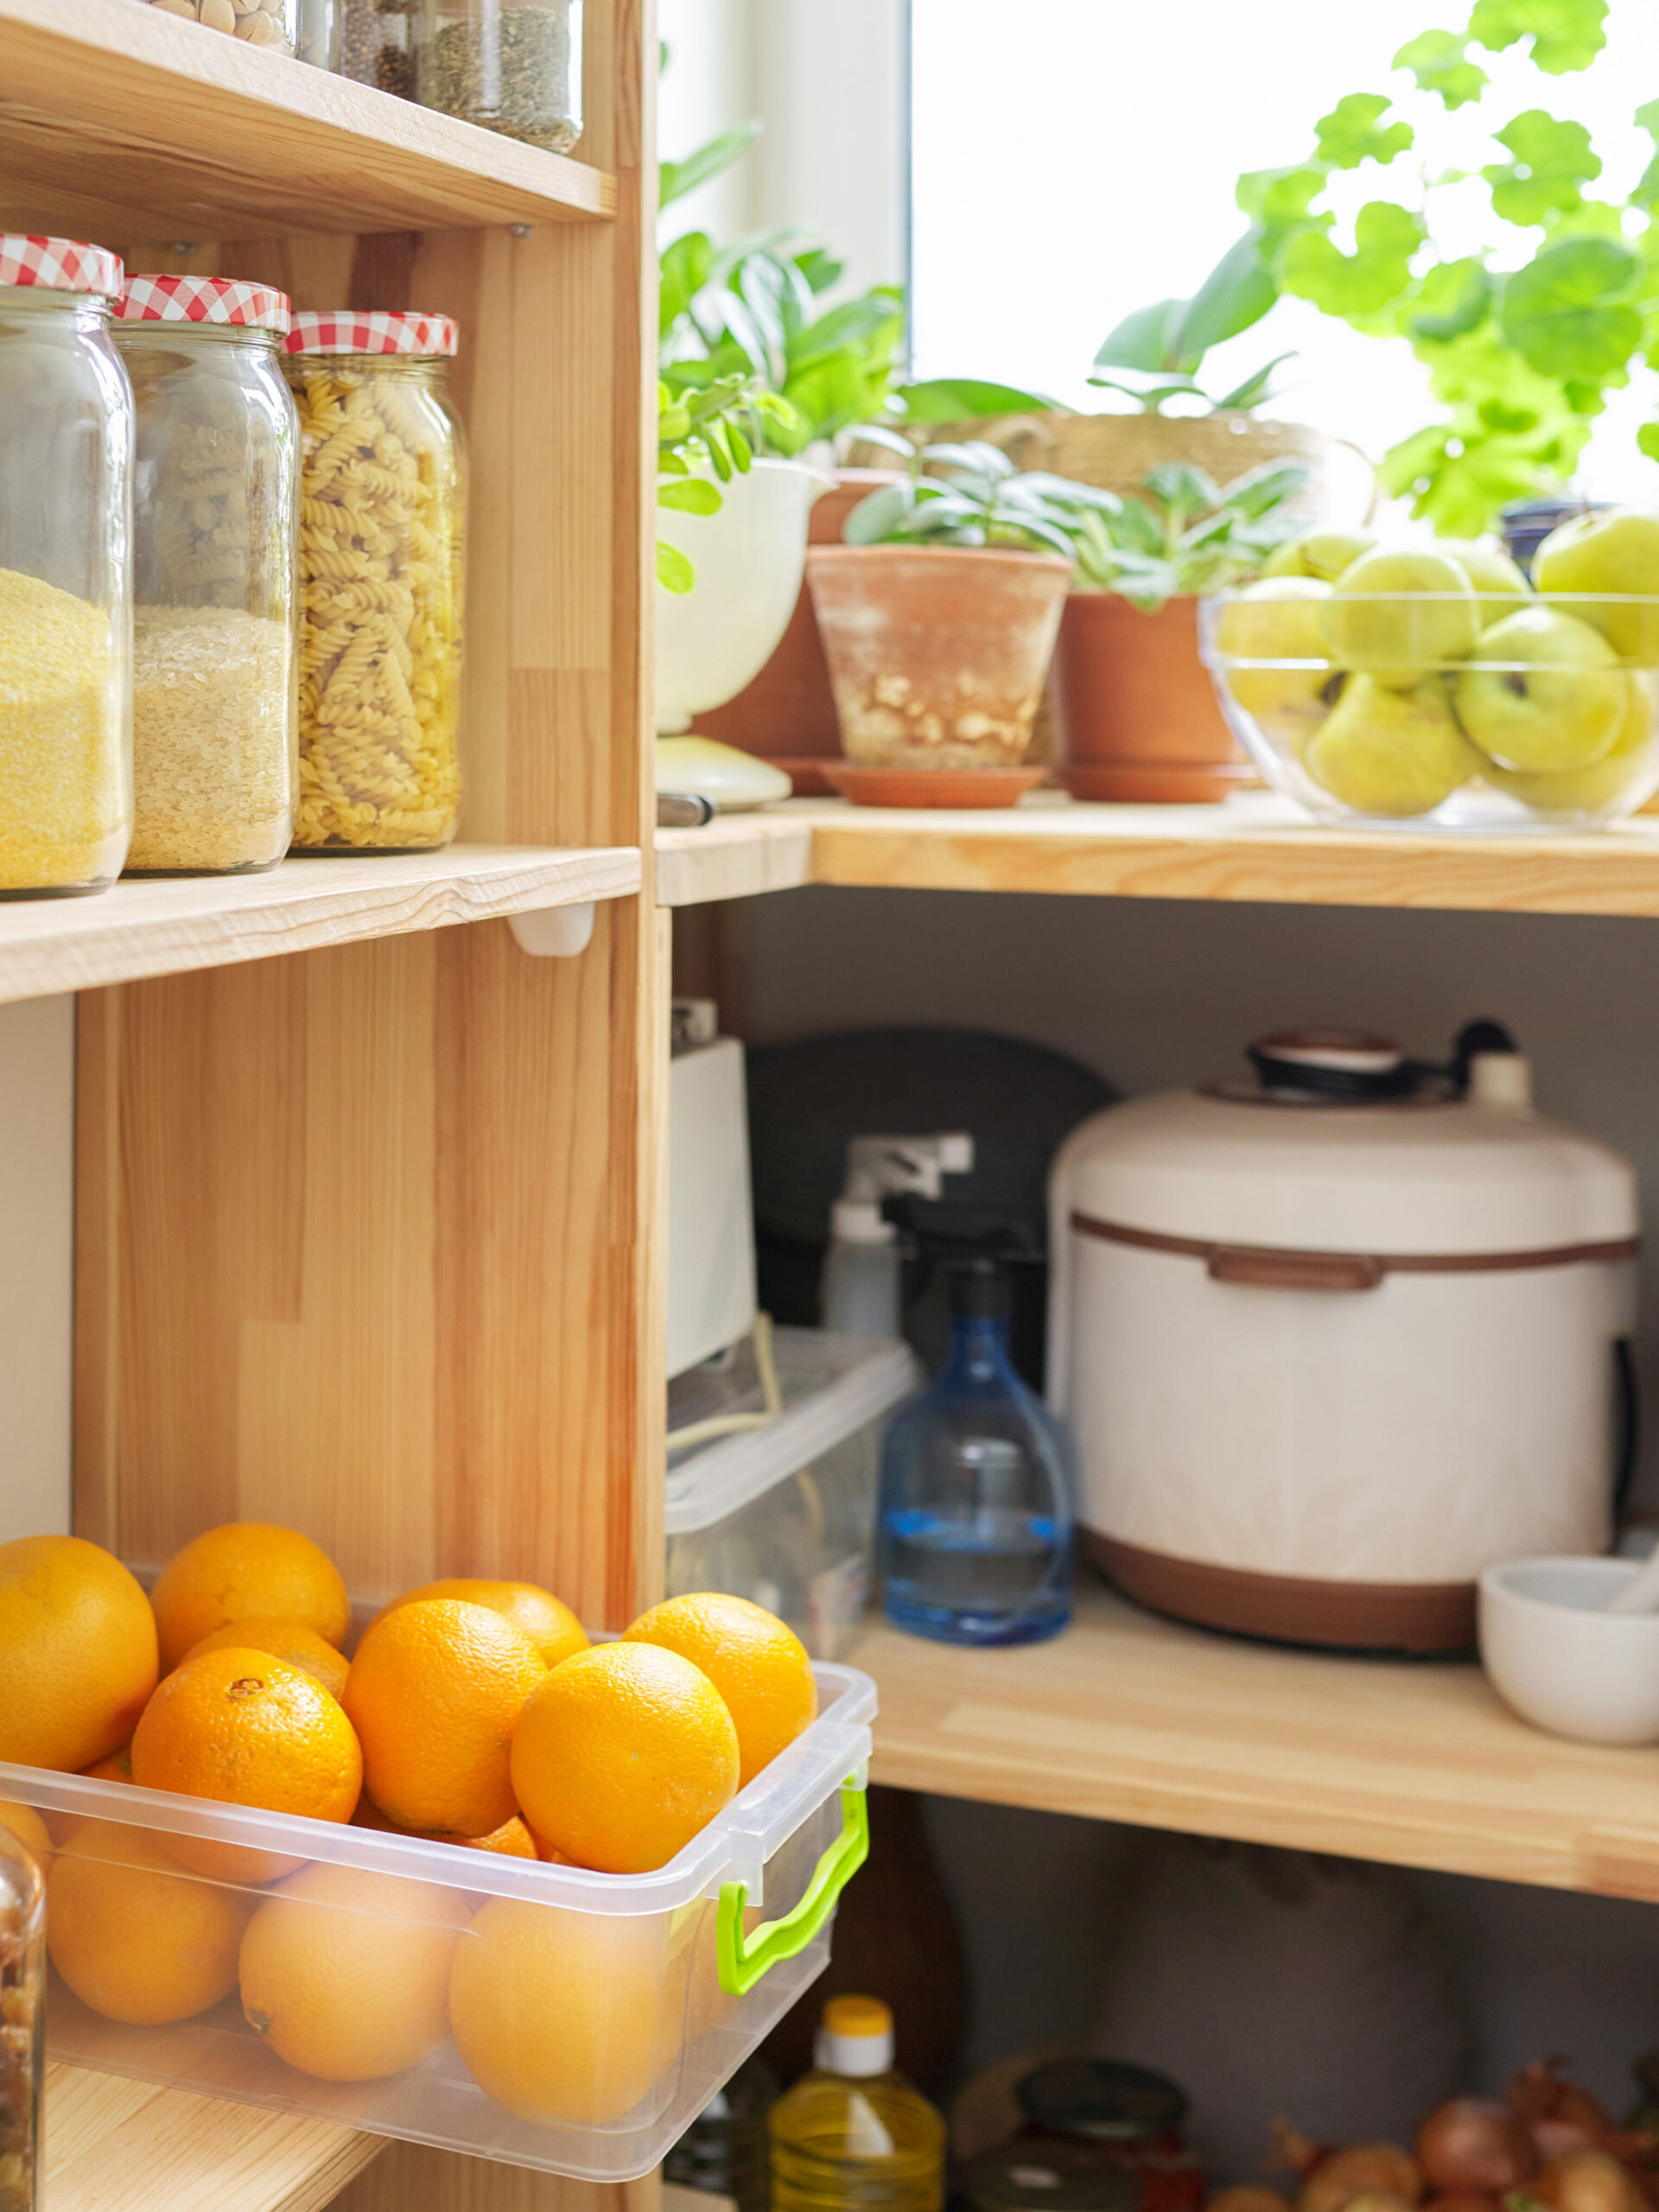 Pantry - A dietitian’s tips on flexible meal planning during COVID-19